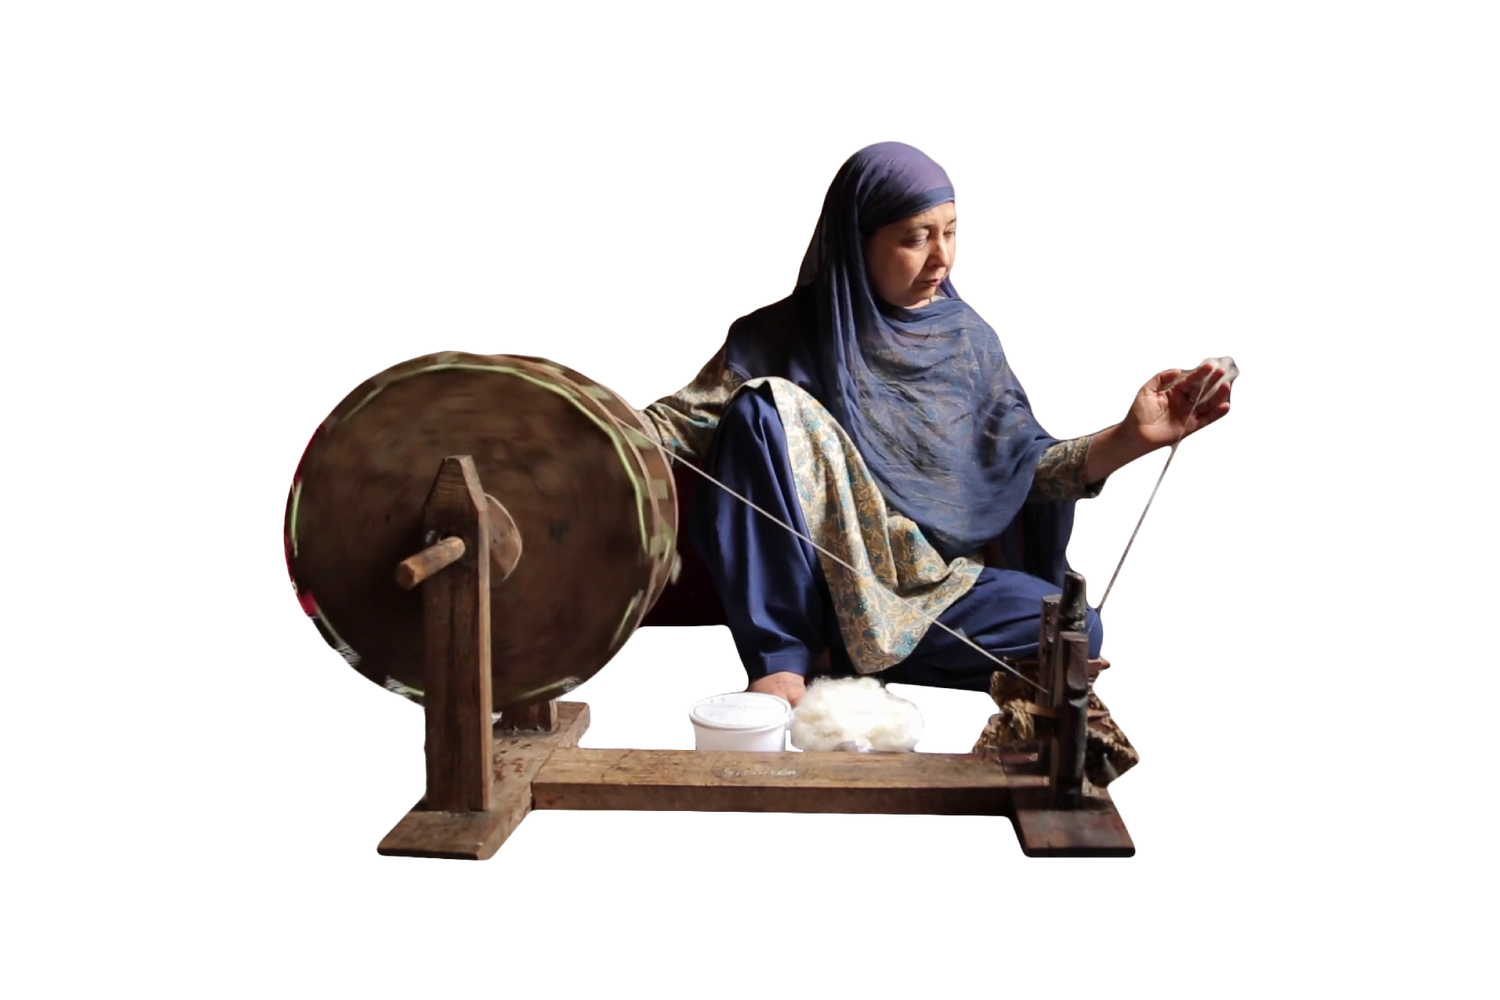 Woman behind a spinning wheel in the remote location of Kashmir who is spinning the cashmere fibres into a yarn